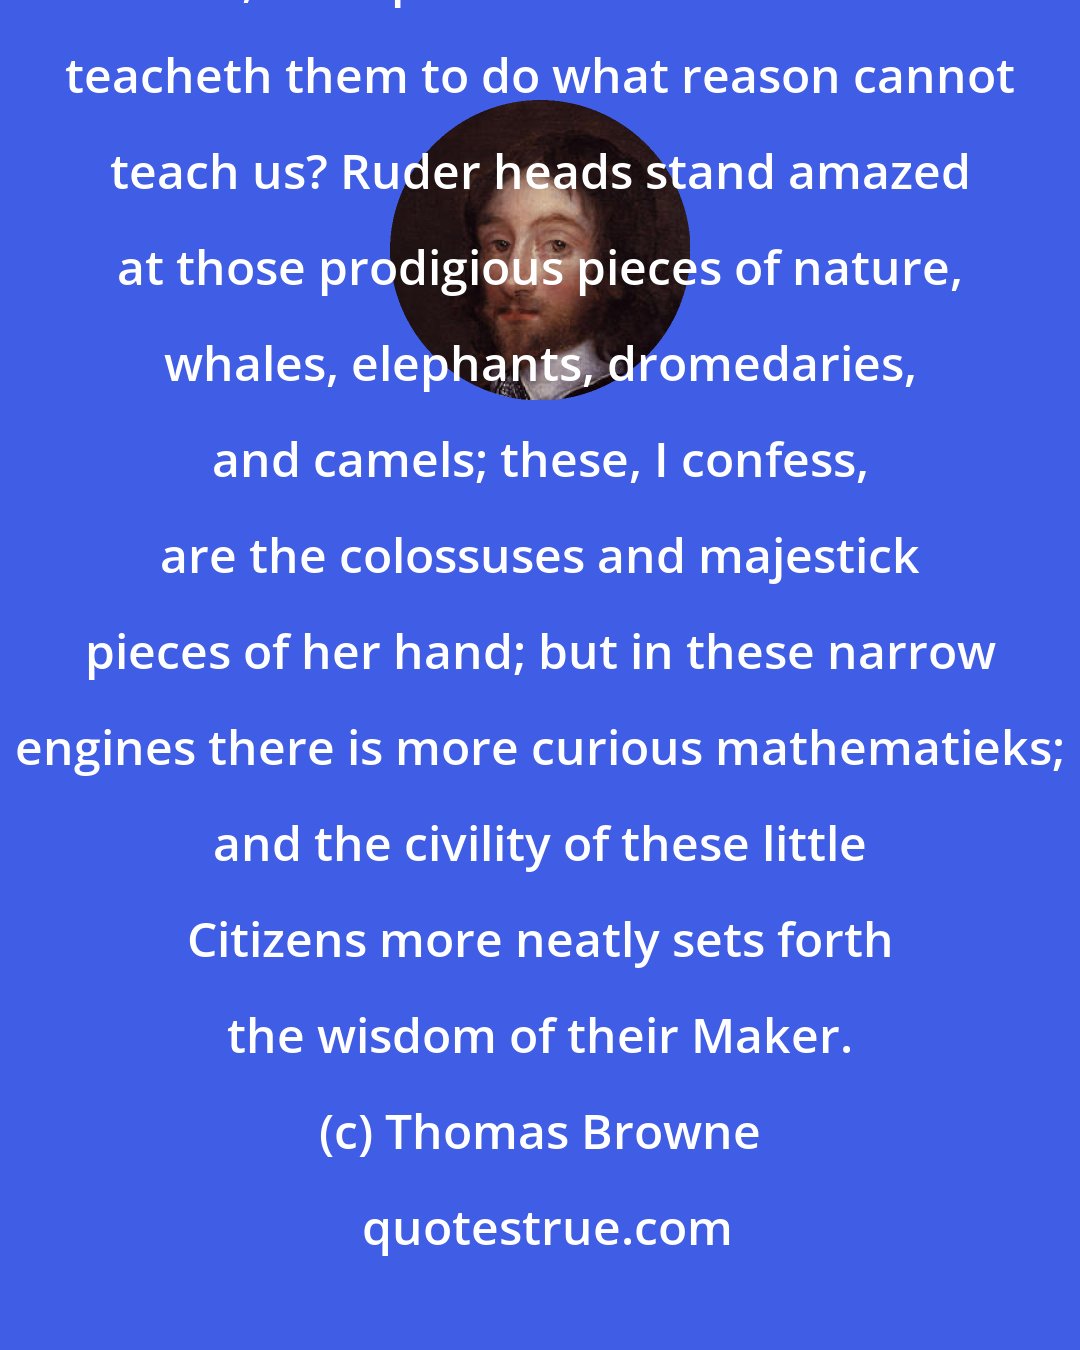 Thomas Browne: ... indeed, what reason may not go to school to the wisdom of bees, ants, and spiders? What wise hand teacheth them to do what reason cannot teach us? Ruder heads stand amazed at those prodigious pieces of nature, whales, elephants, dromedaries, and camels; these, I confess, are the colossuses and majestick pieces of her hand; but in these narrow engines there is more curious mathematieks; and the civility of these little Citizens more neatly sets forth the wisdom of their Maker.